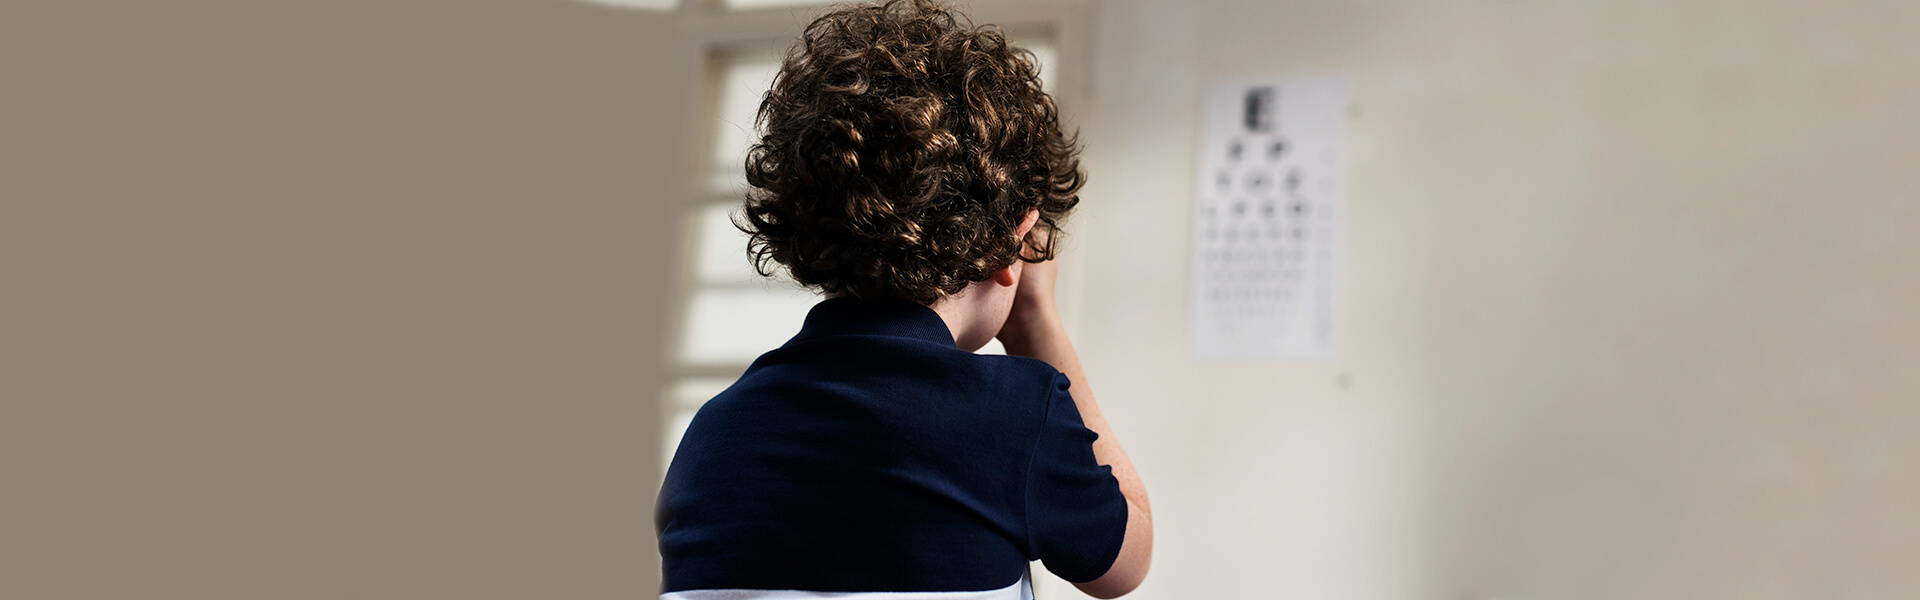 When Should You Require Emergency Eye Care?